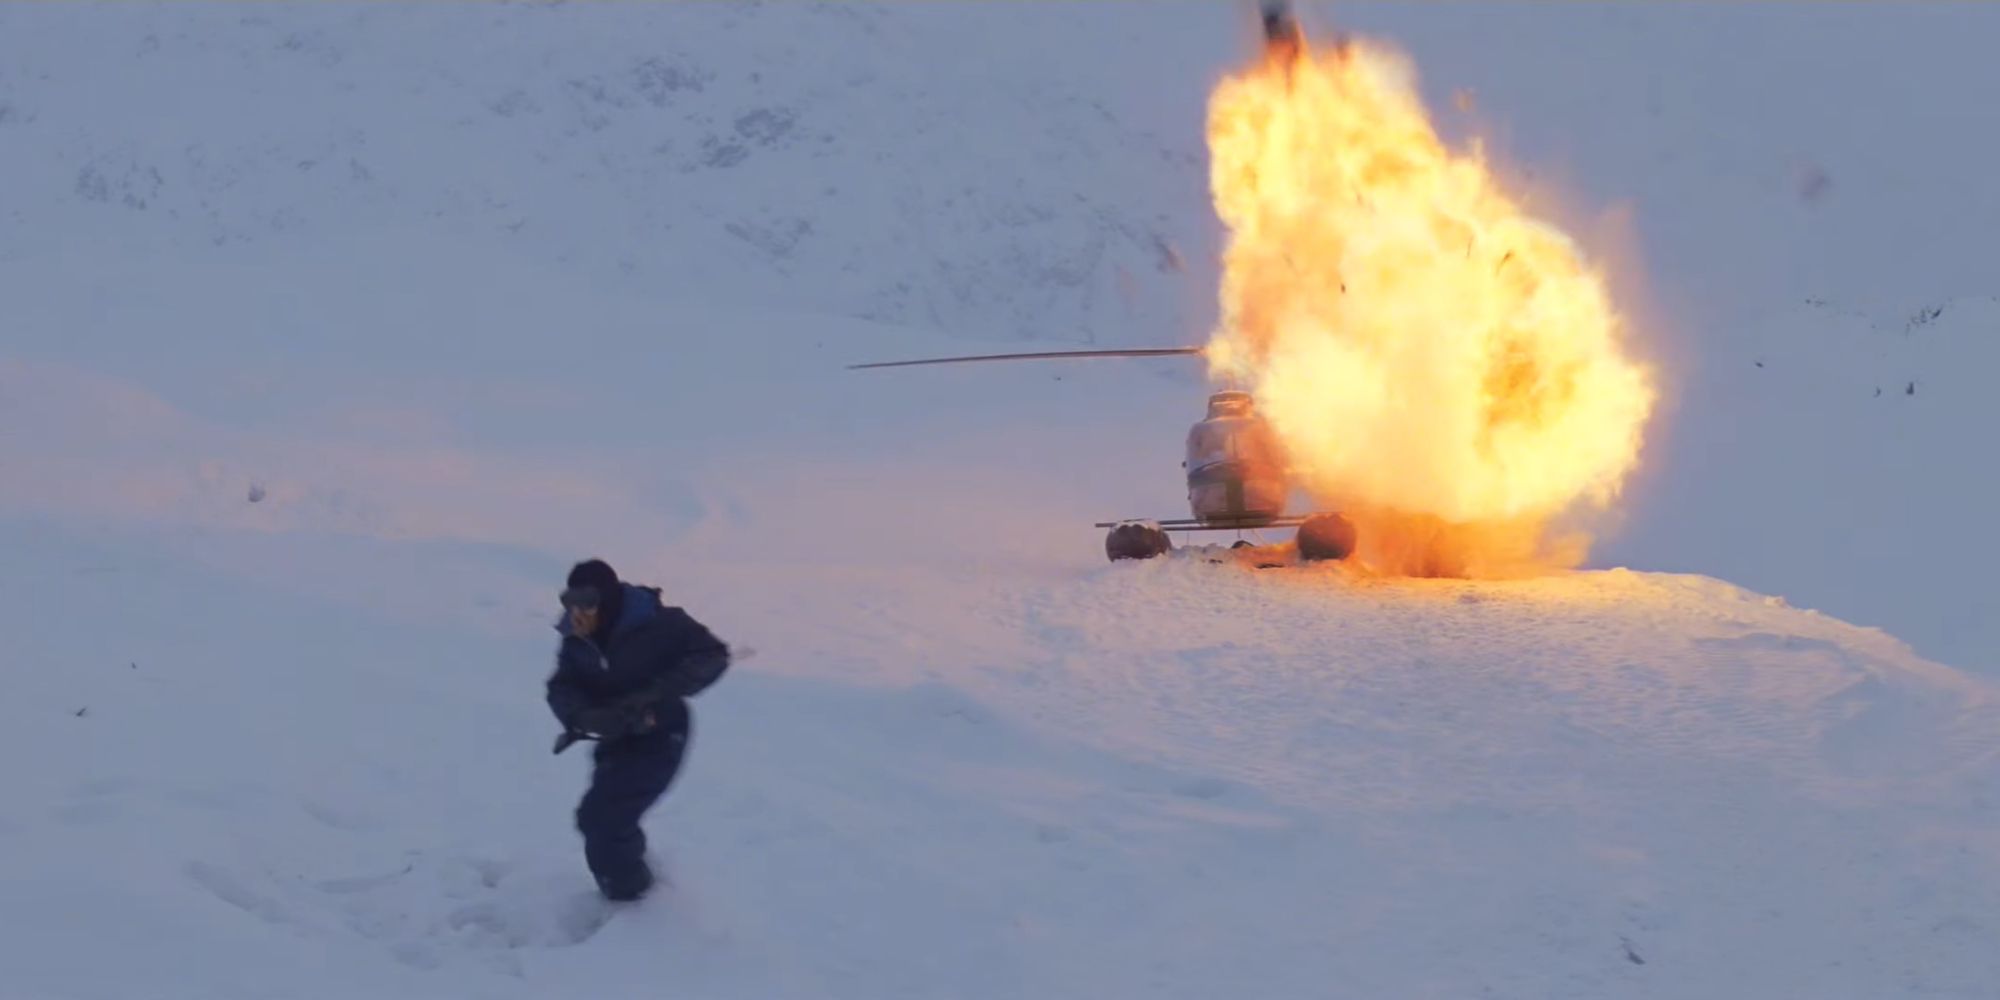 Matias dying in an explosion while Lars runs from the explosion in John Carpenter's The Thing